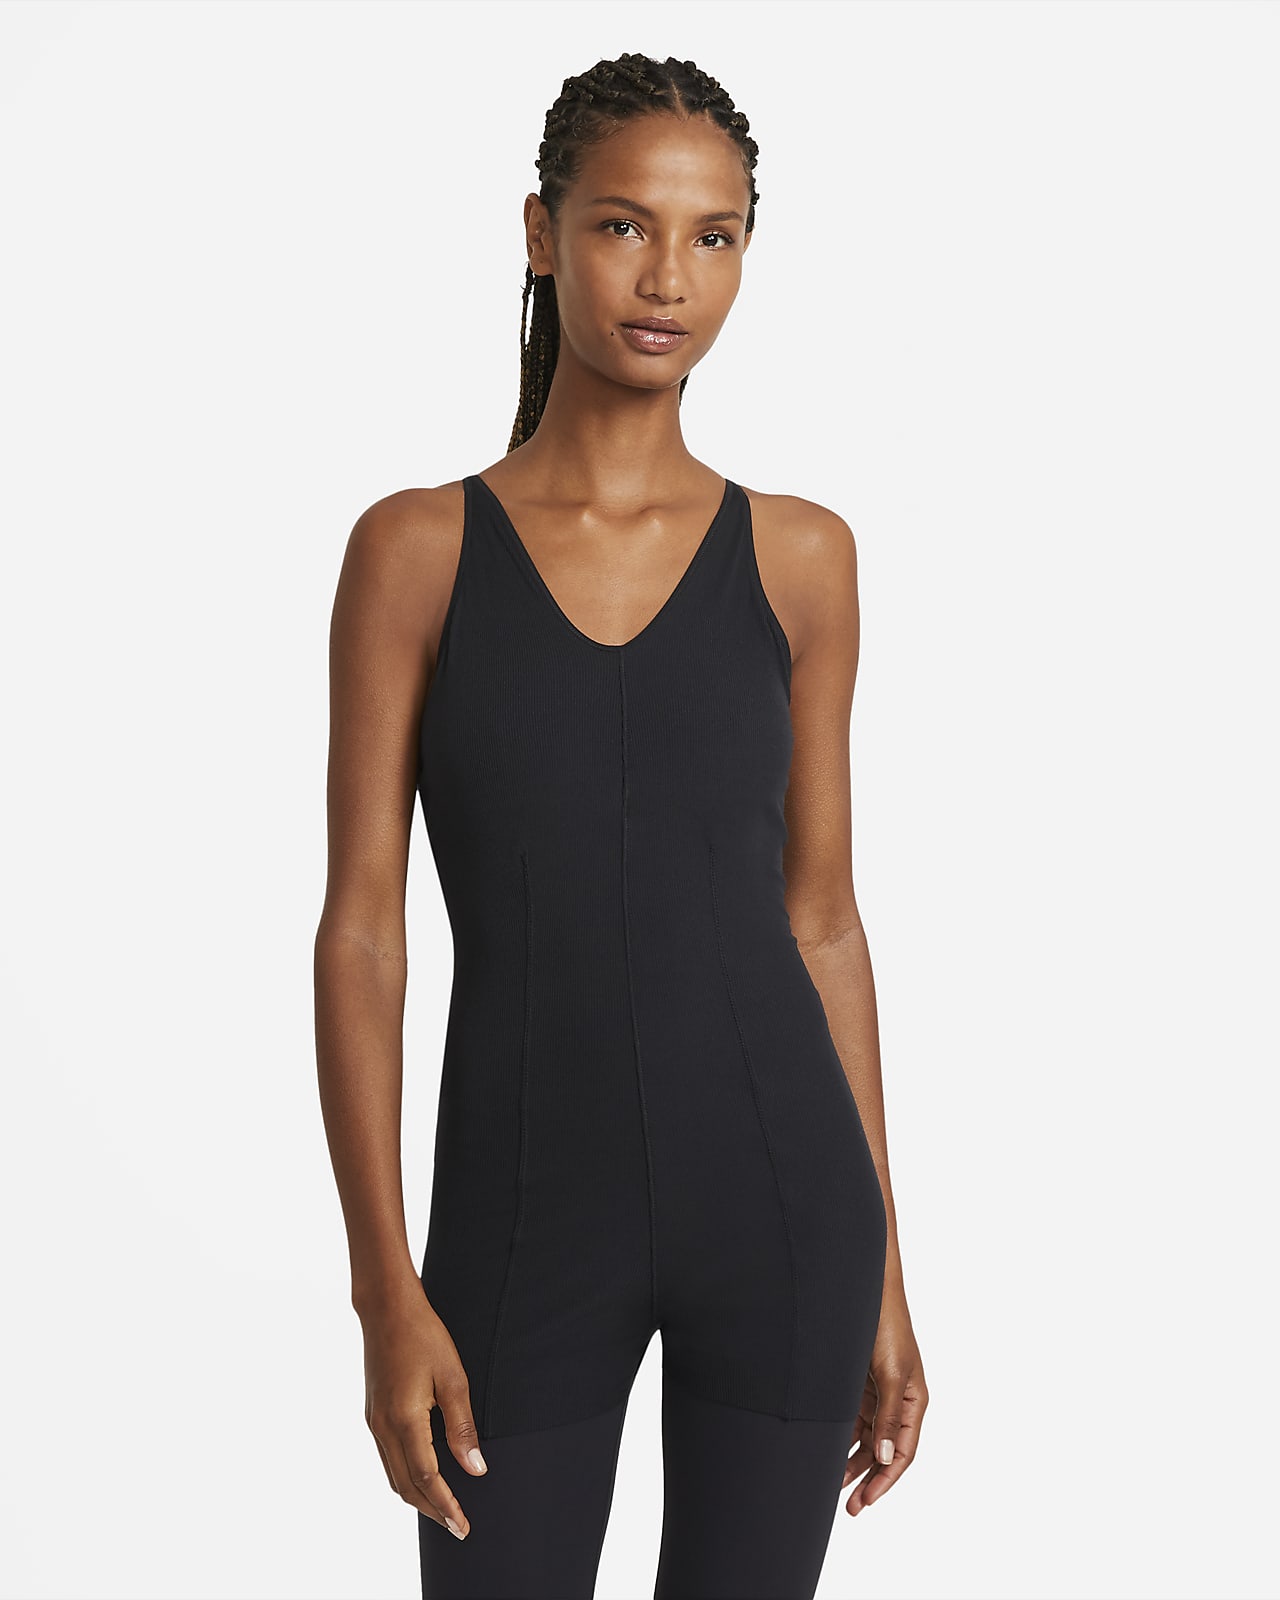 nike yoga luxe jumpsuit